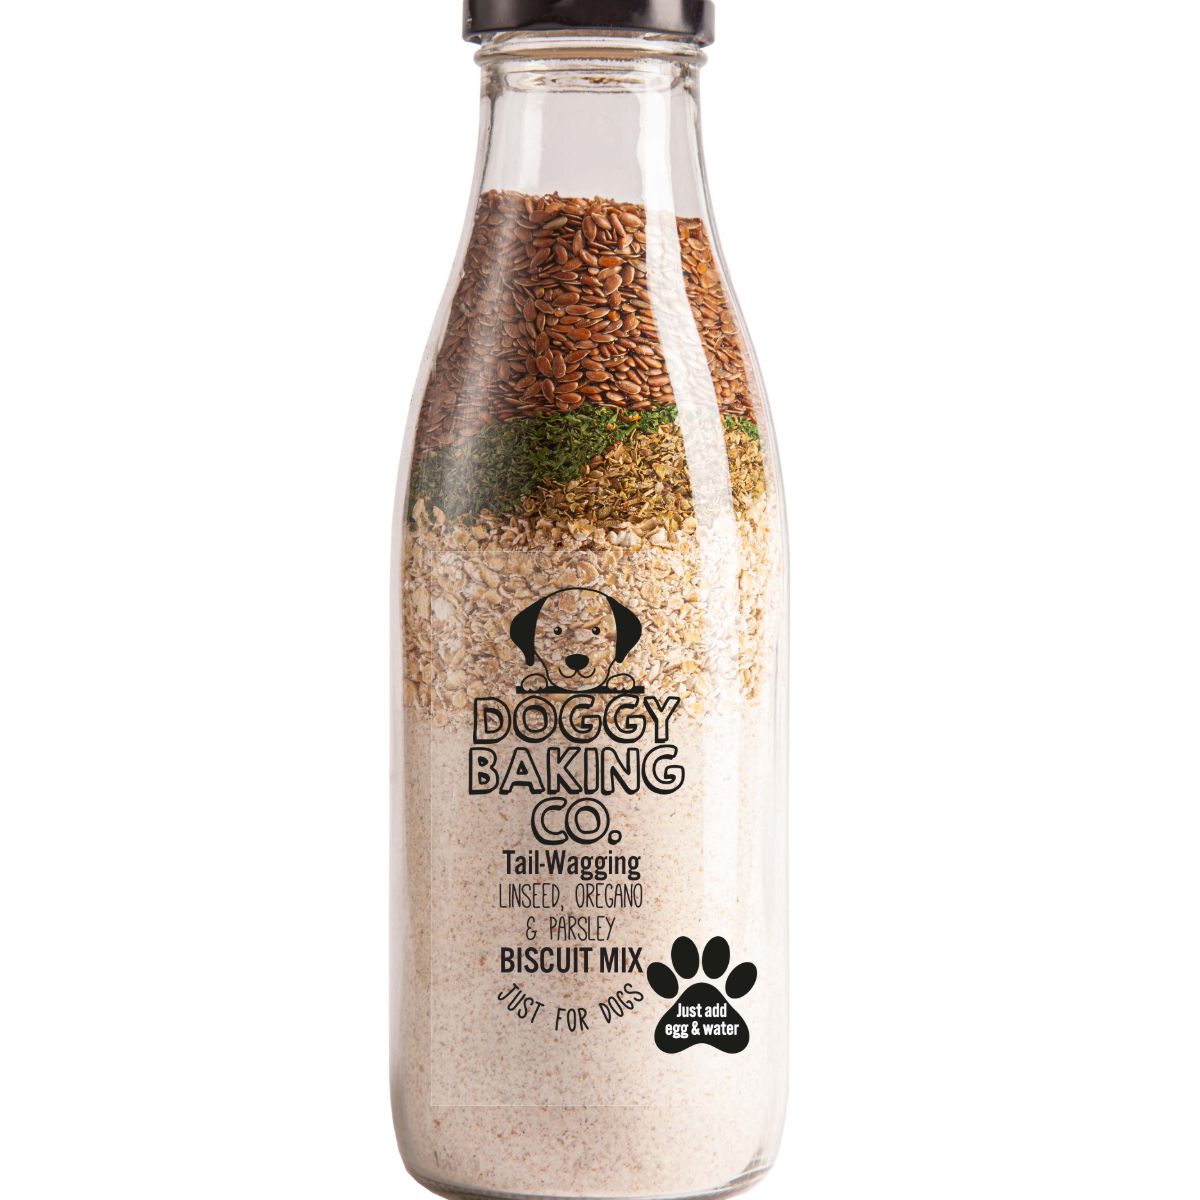 Tail-Wagging Linseed, Oregano & Parsley Doggy Biscuit Baking Mix in a Bottle - Doggy Baking Co by The Bottled Baking Co